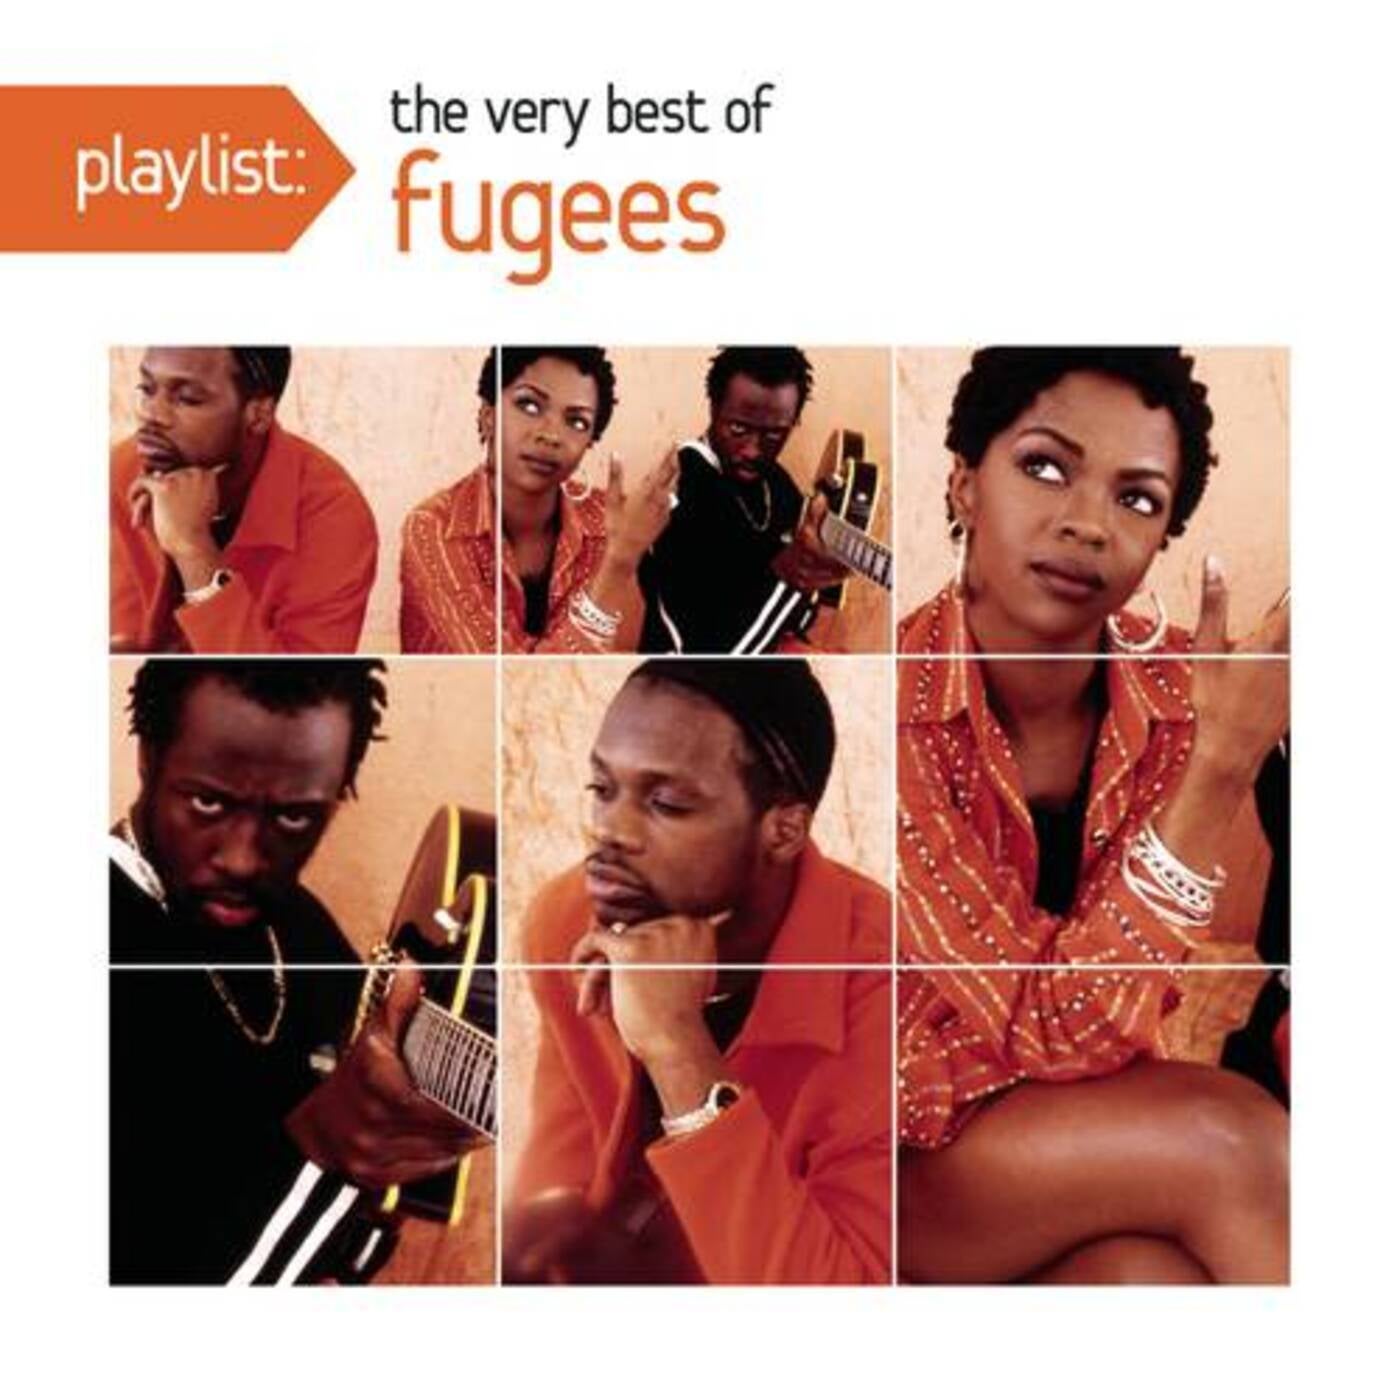 Alice Udgående Modsætte sig Playlist: The Very Best of Fugees by Fugees, Wyclef Jean, Ms. Lauryn Hill,  Pras and Diamond D on Beatsource